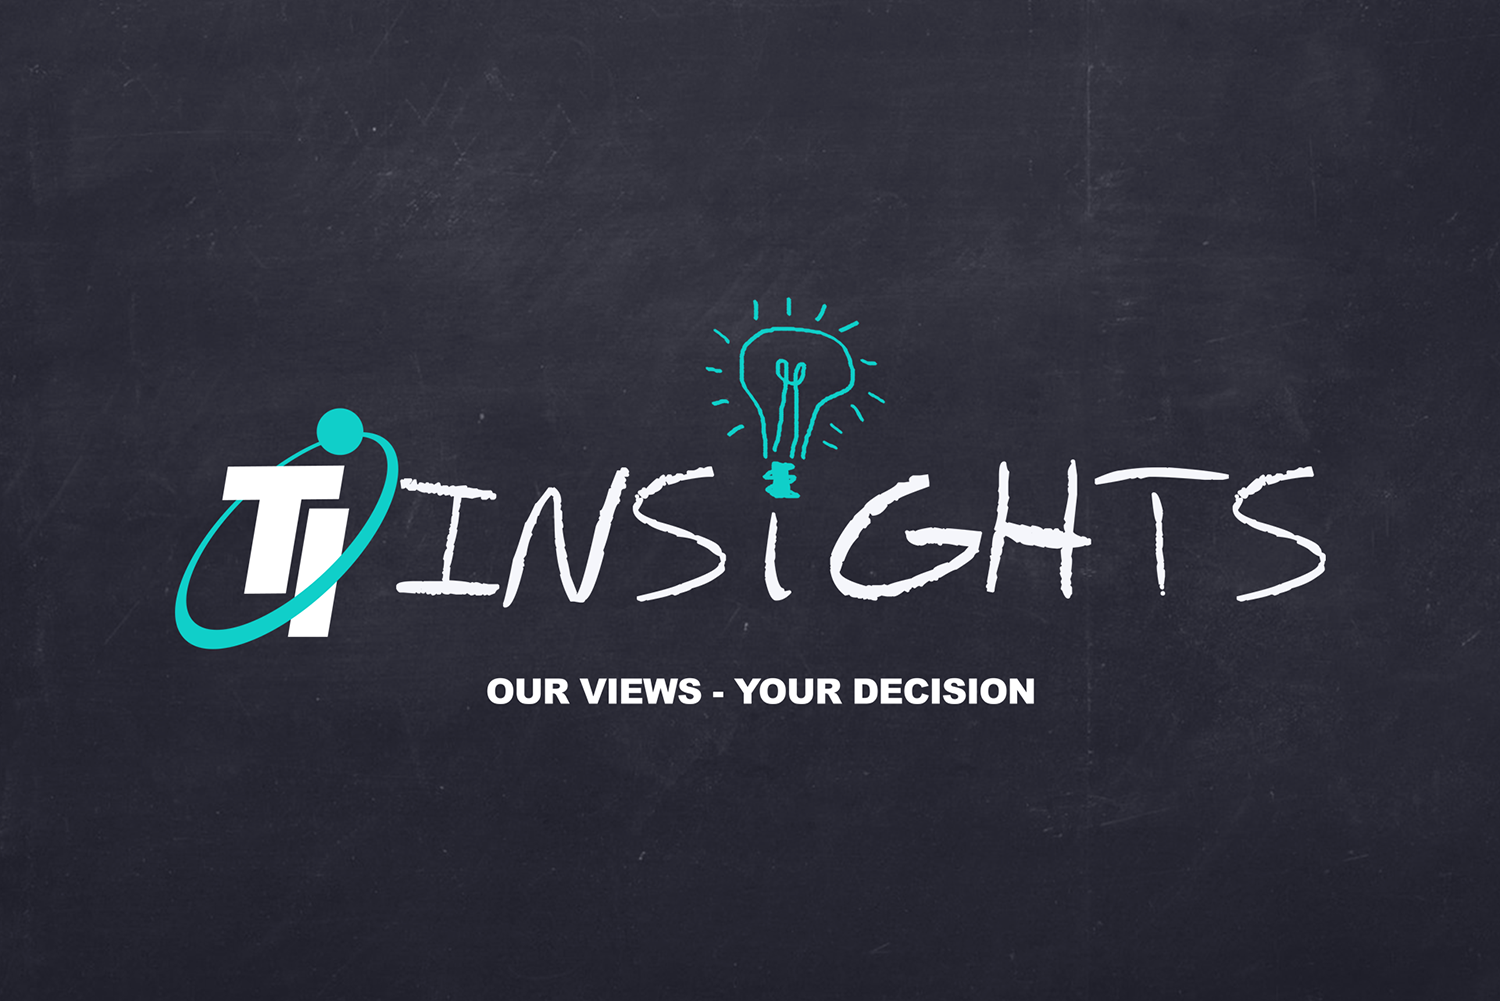 ti insights featured